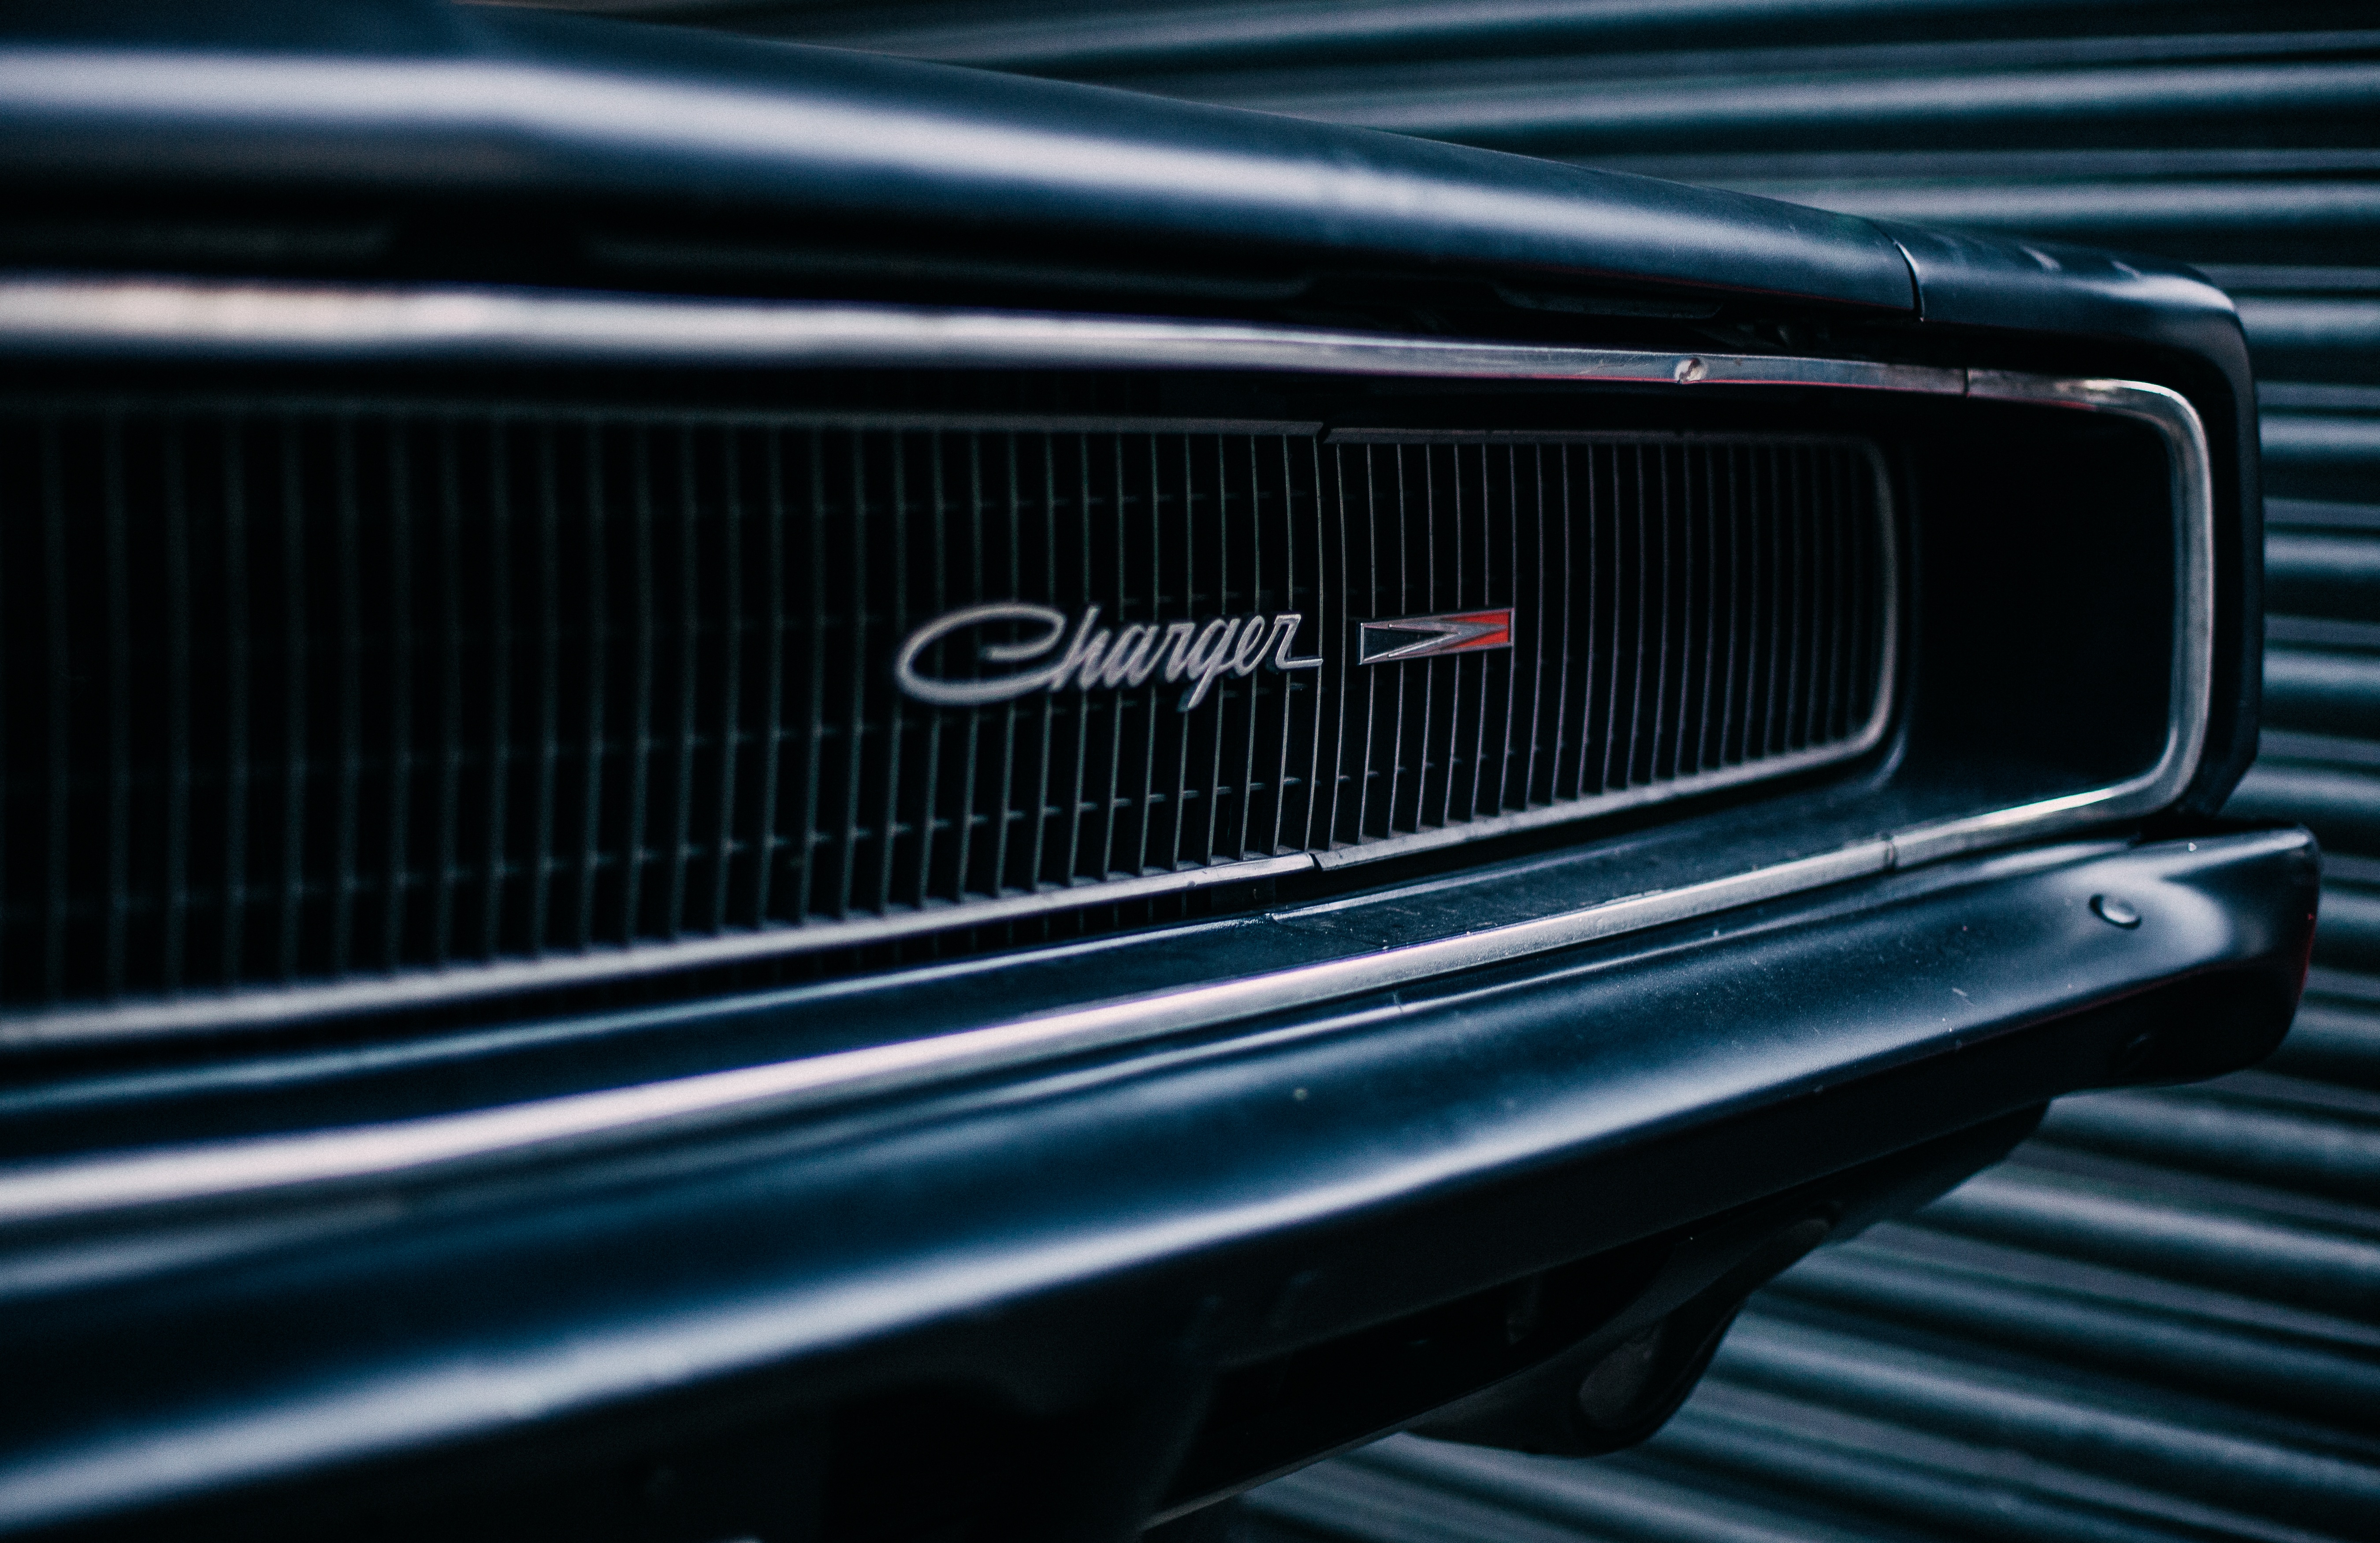 Phone Wallpaper (No watermarks) dodge charger, front bumper, logo, cars